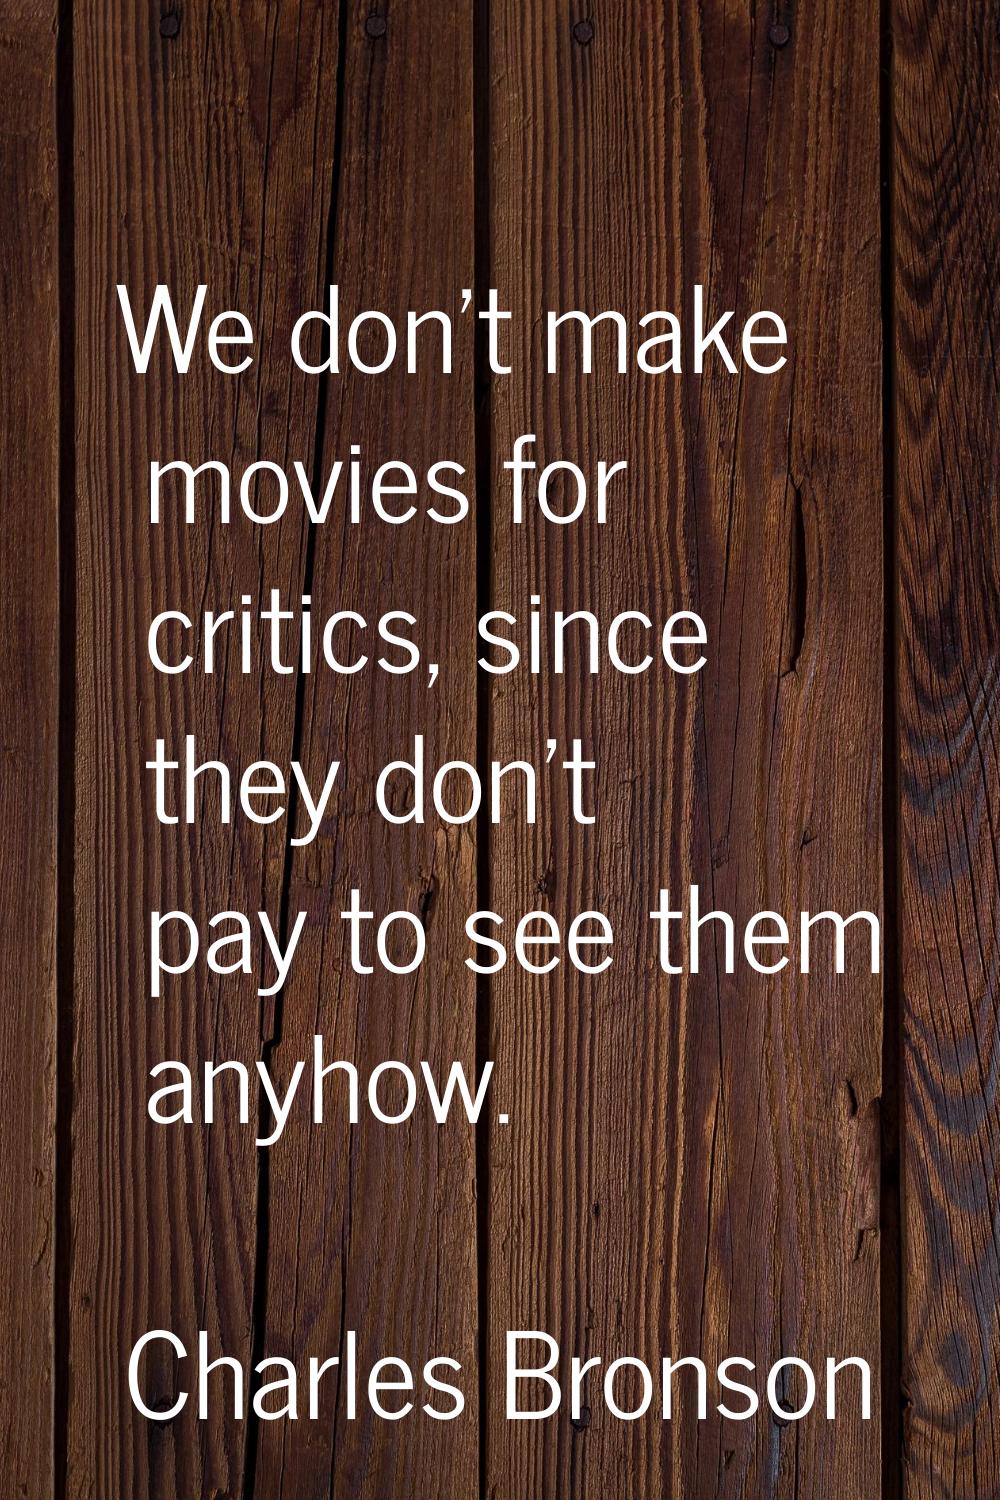 We don't make movies for critics, since they don't pay to see them anyhow.